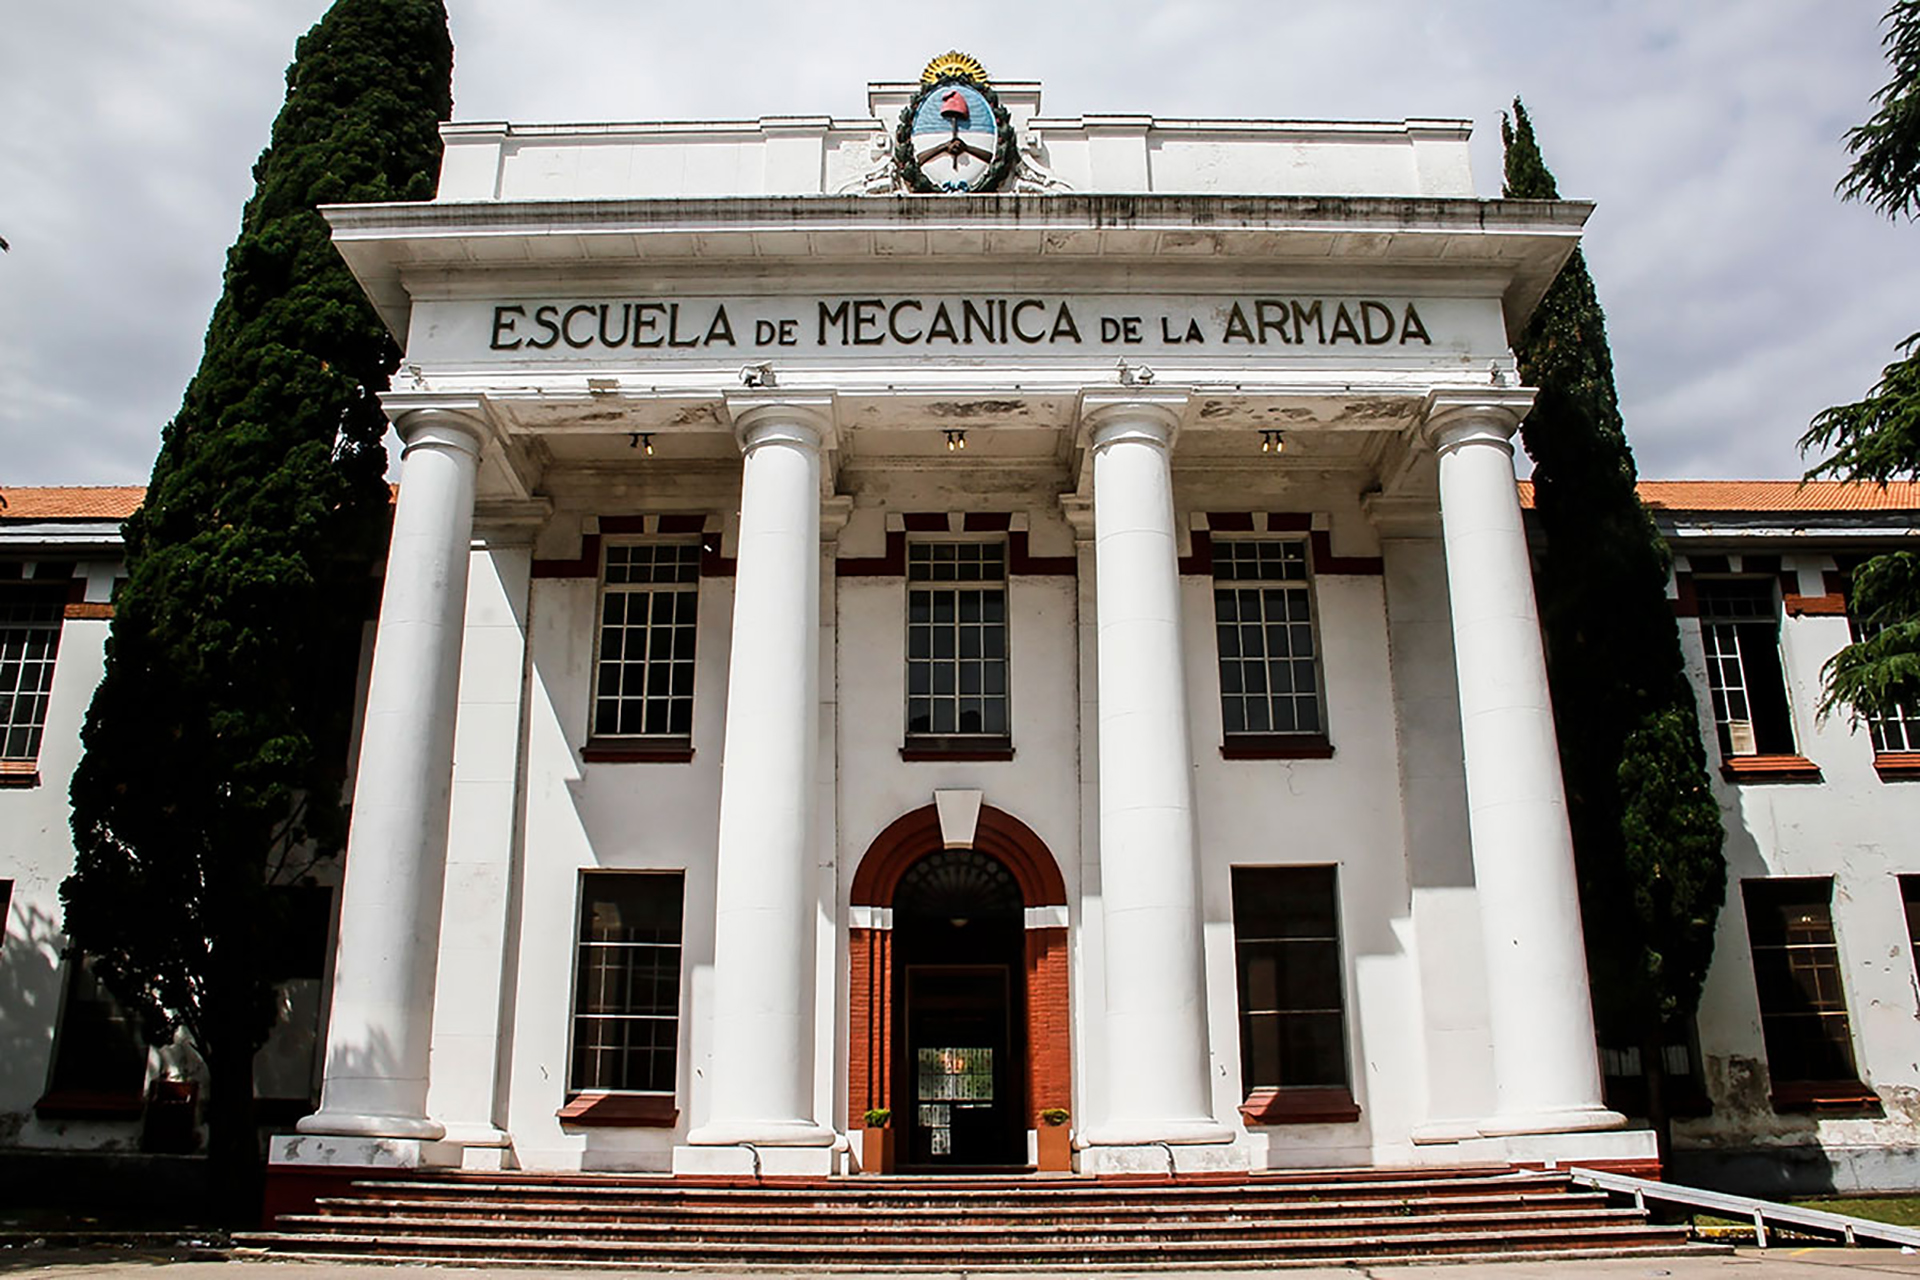 The façade of the former Navy School of Mechanics, where a clandestine detention, torture and extermination center operated during the last dictatorship